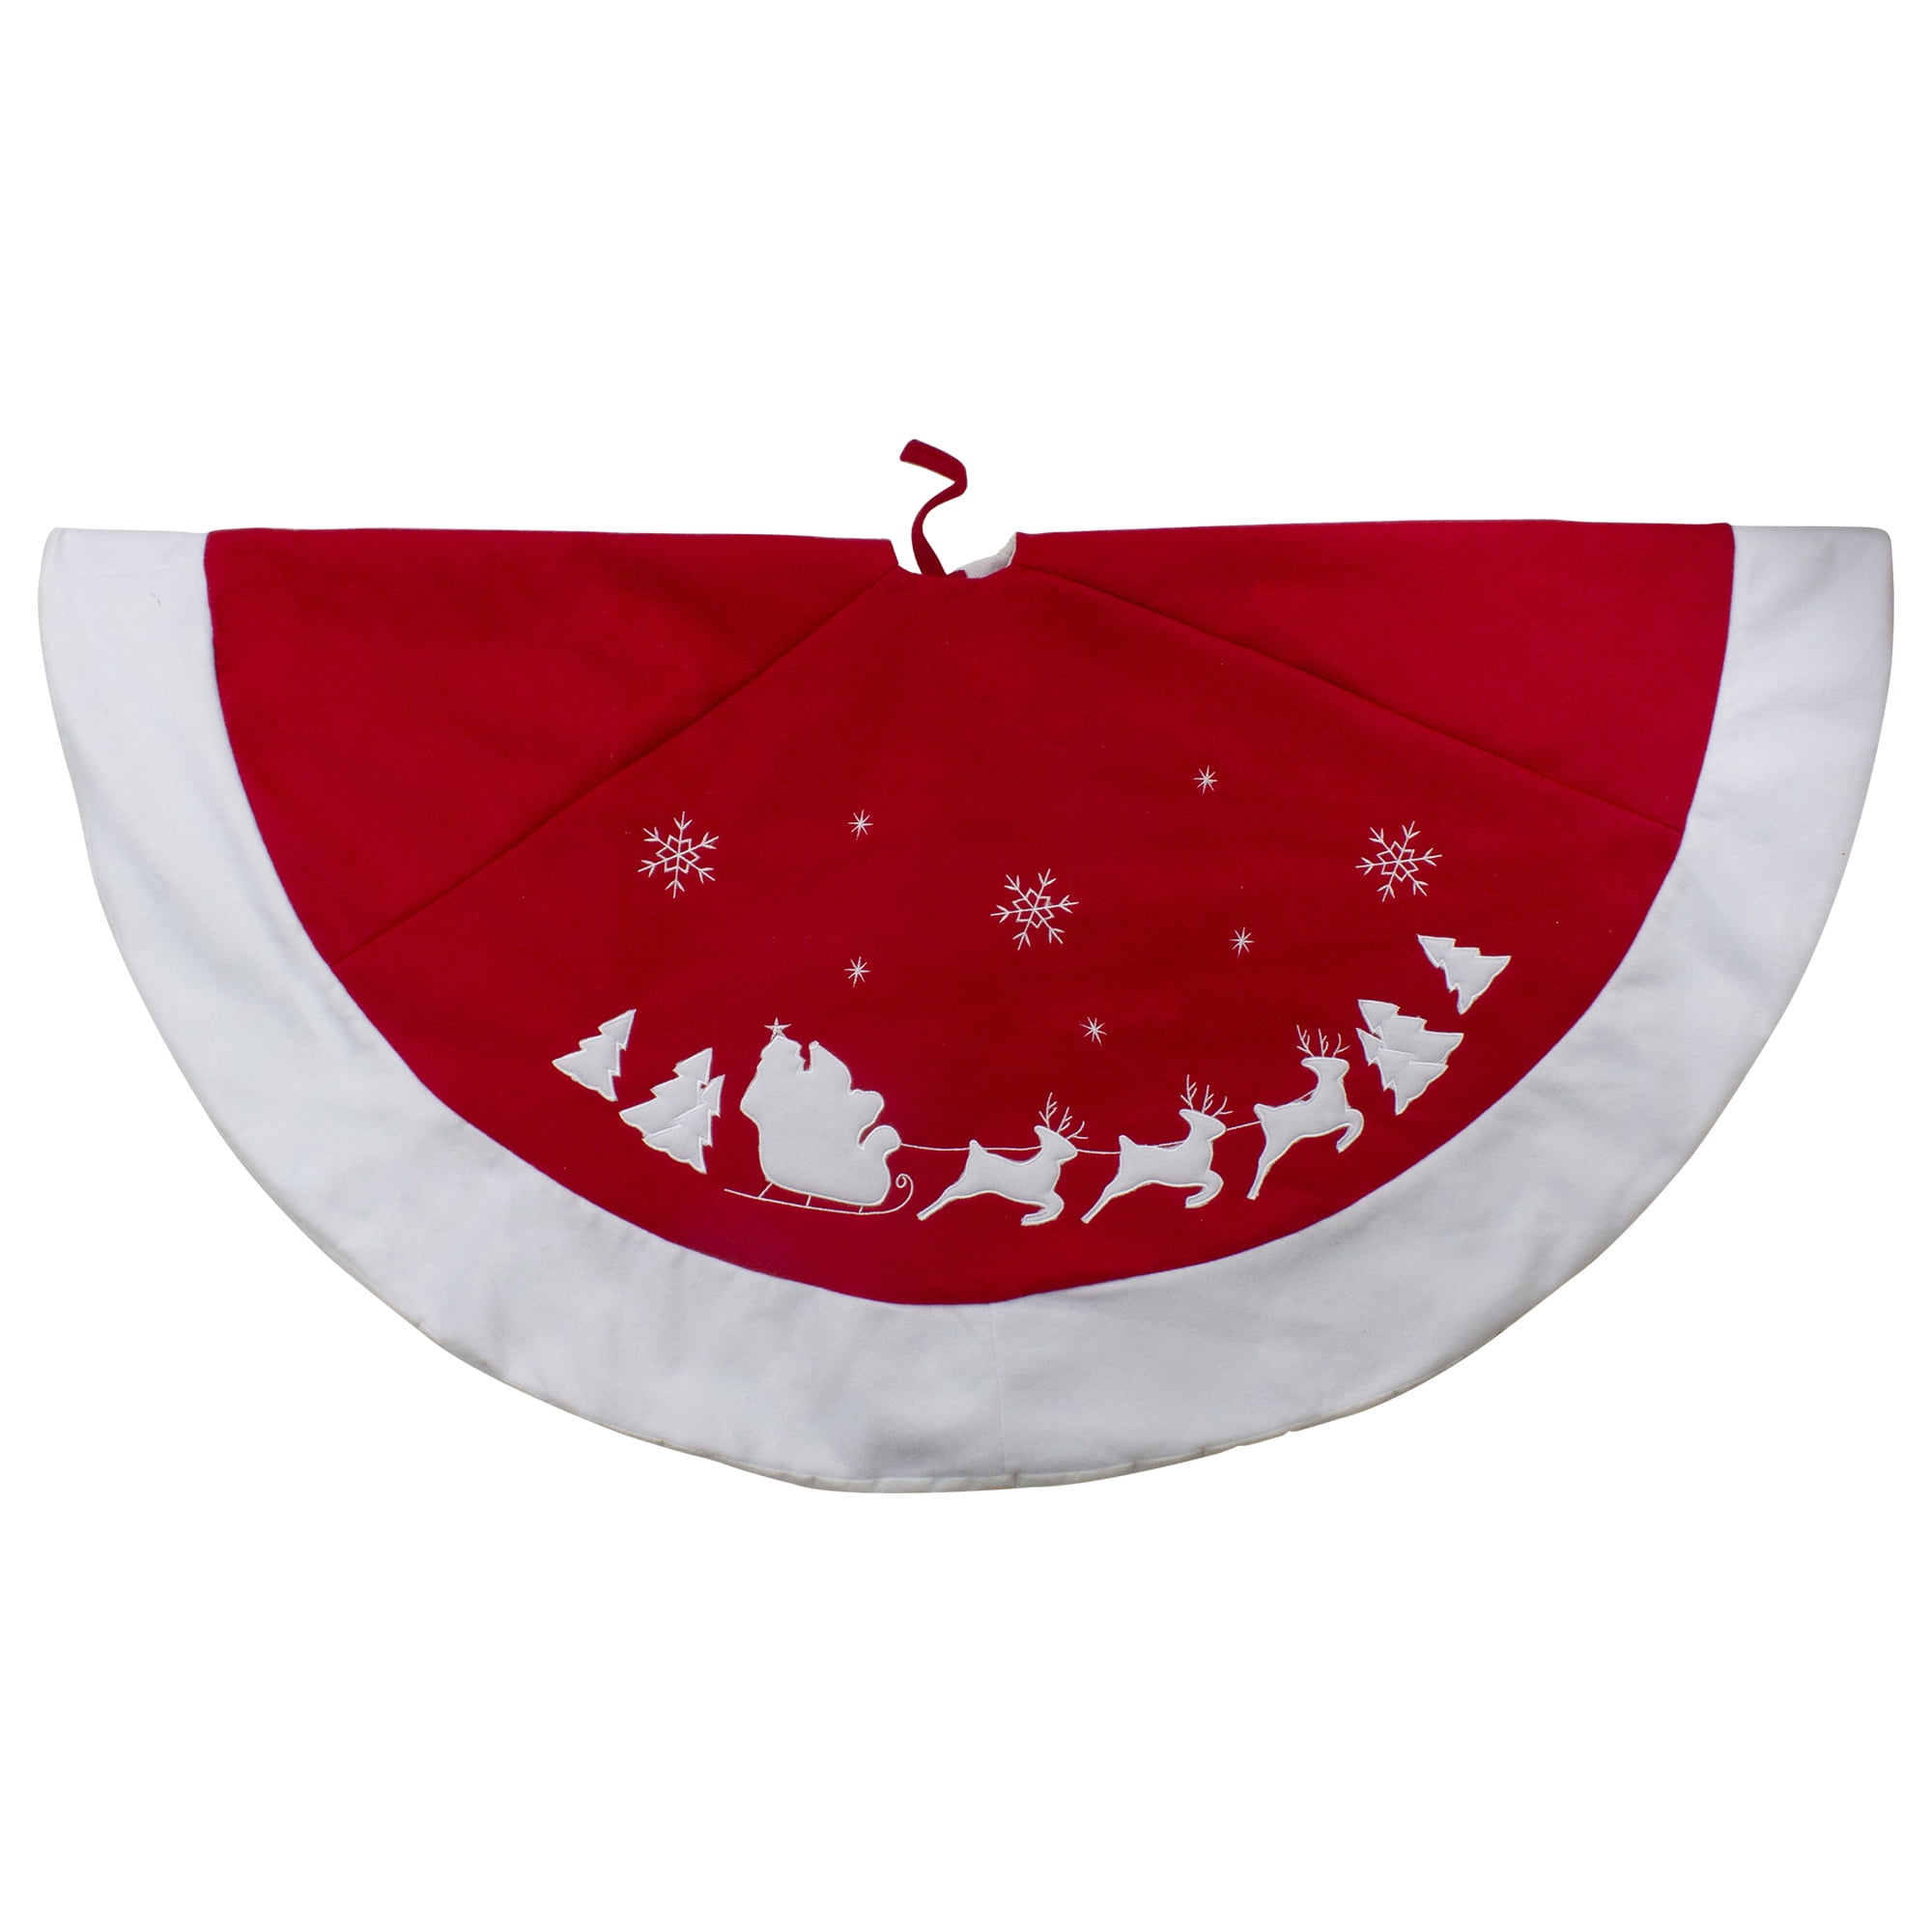 Northlight Santa Claus and Reindeer Christmas Tree Skirt - Red/White ...